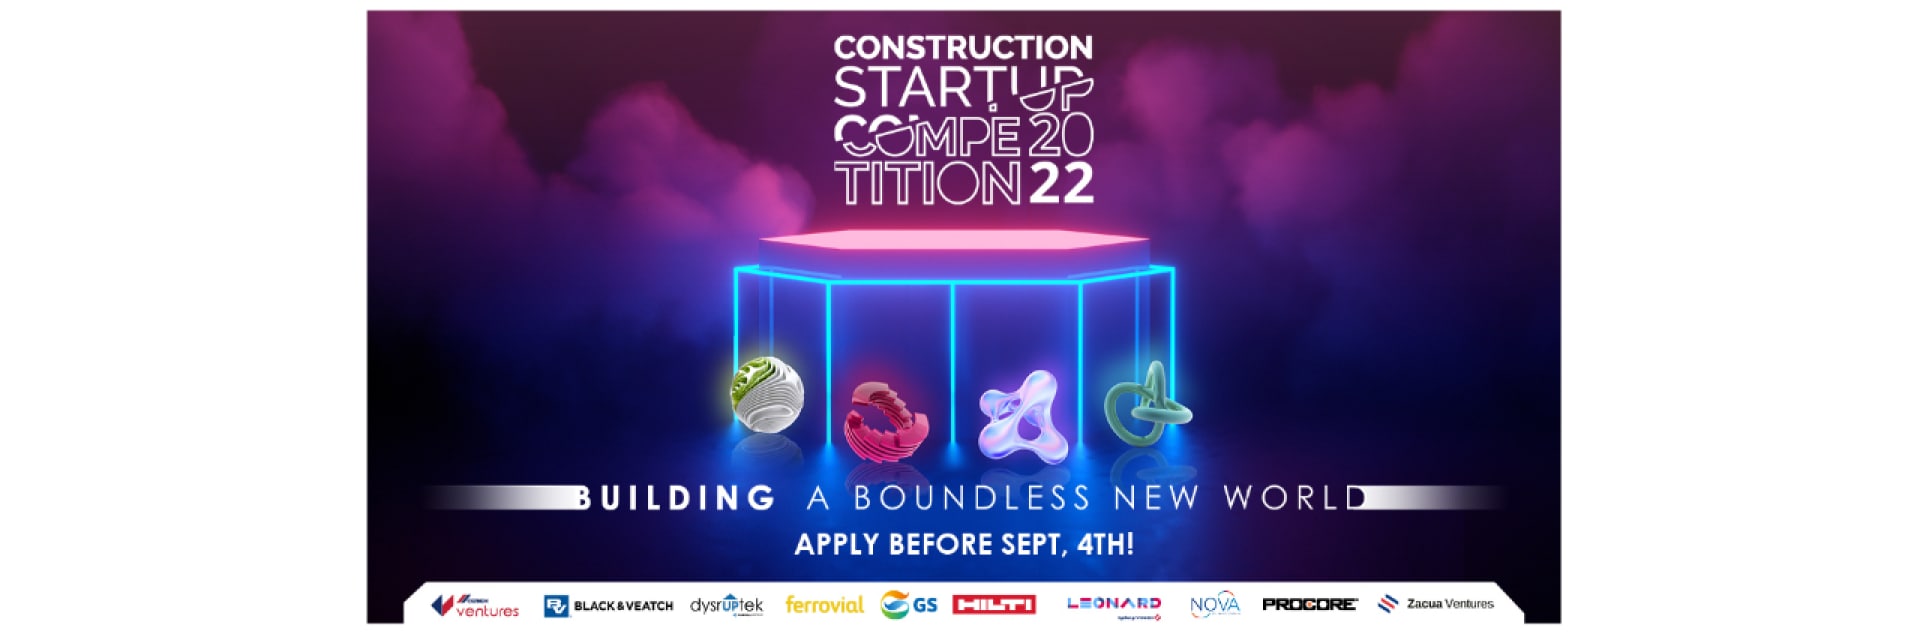 Construction startup competition 2022